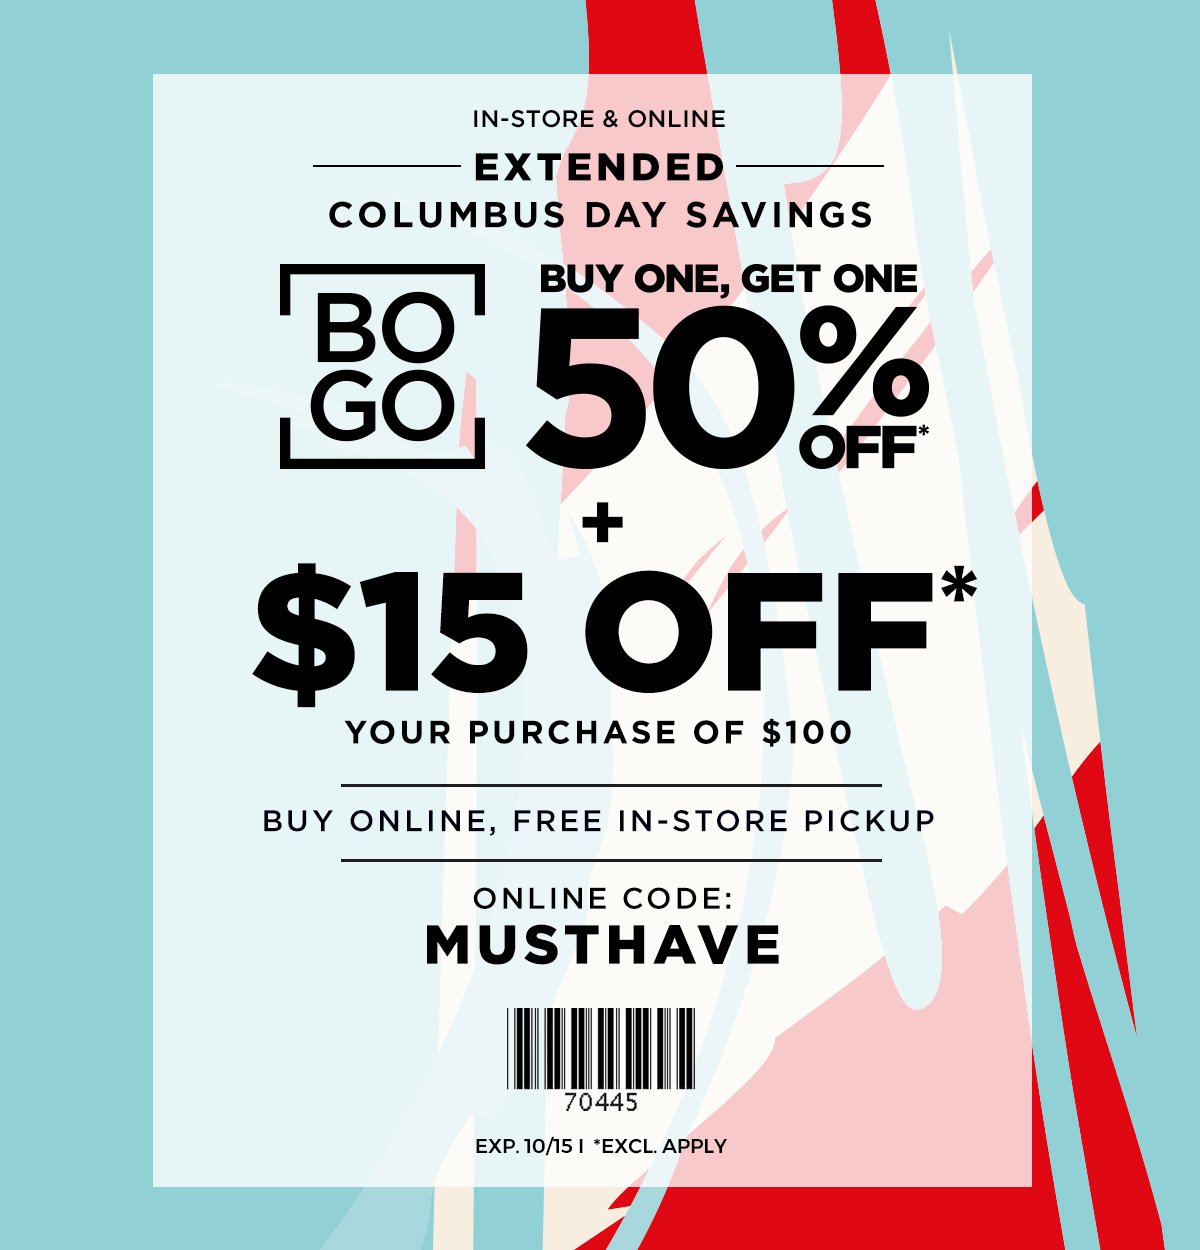 EXTENDED FOR ONE DAY BOGO 50% OFF* + \\$15 OFF* \\$100 + BUY ONLINE, FREE IN-STORE PICKUP ONLINE CODE: MUSTHAVE